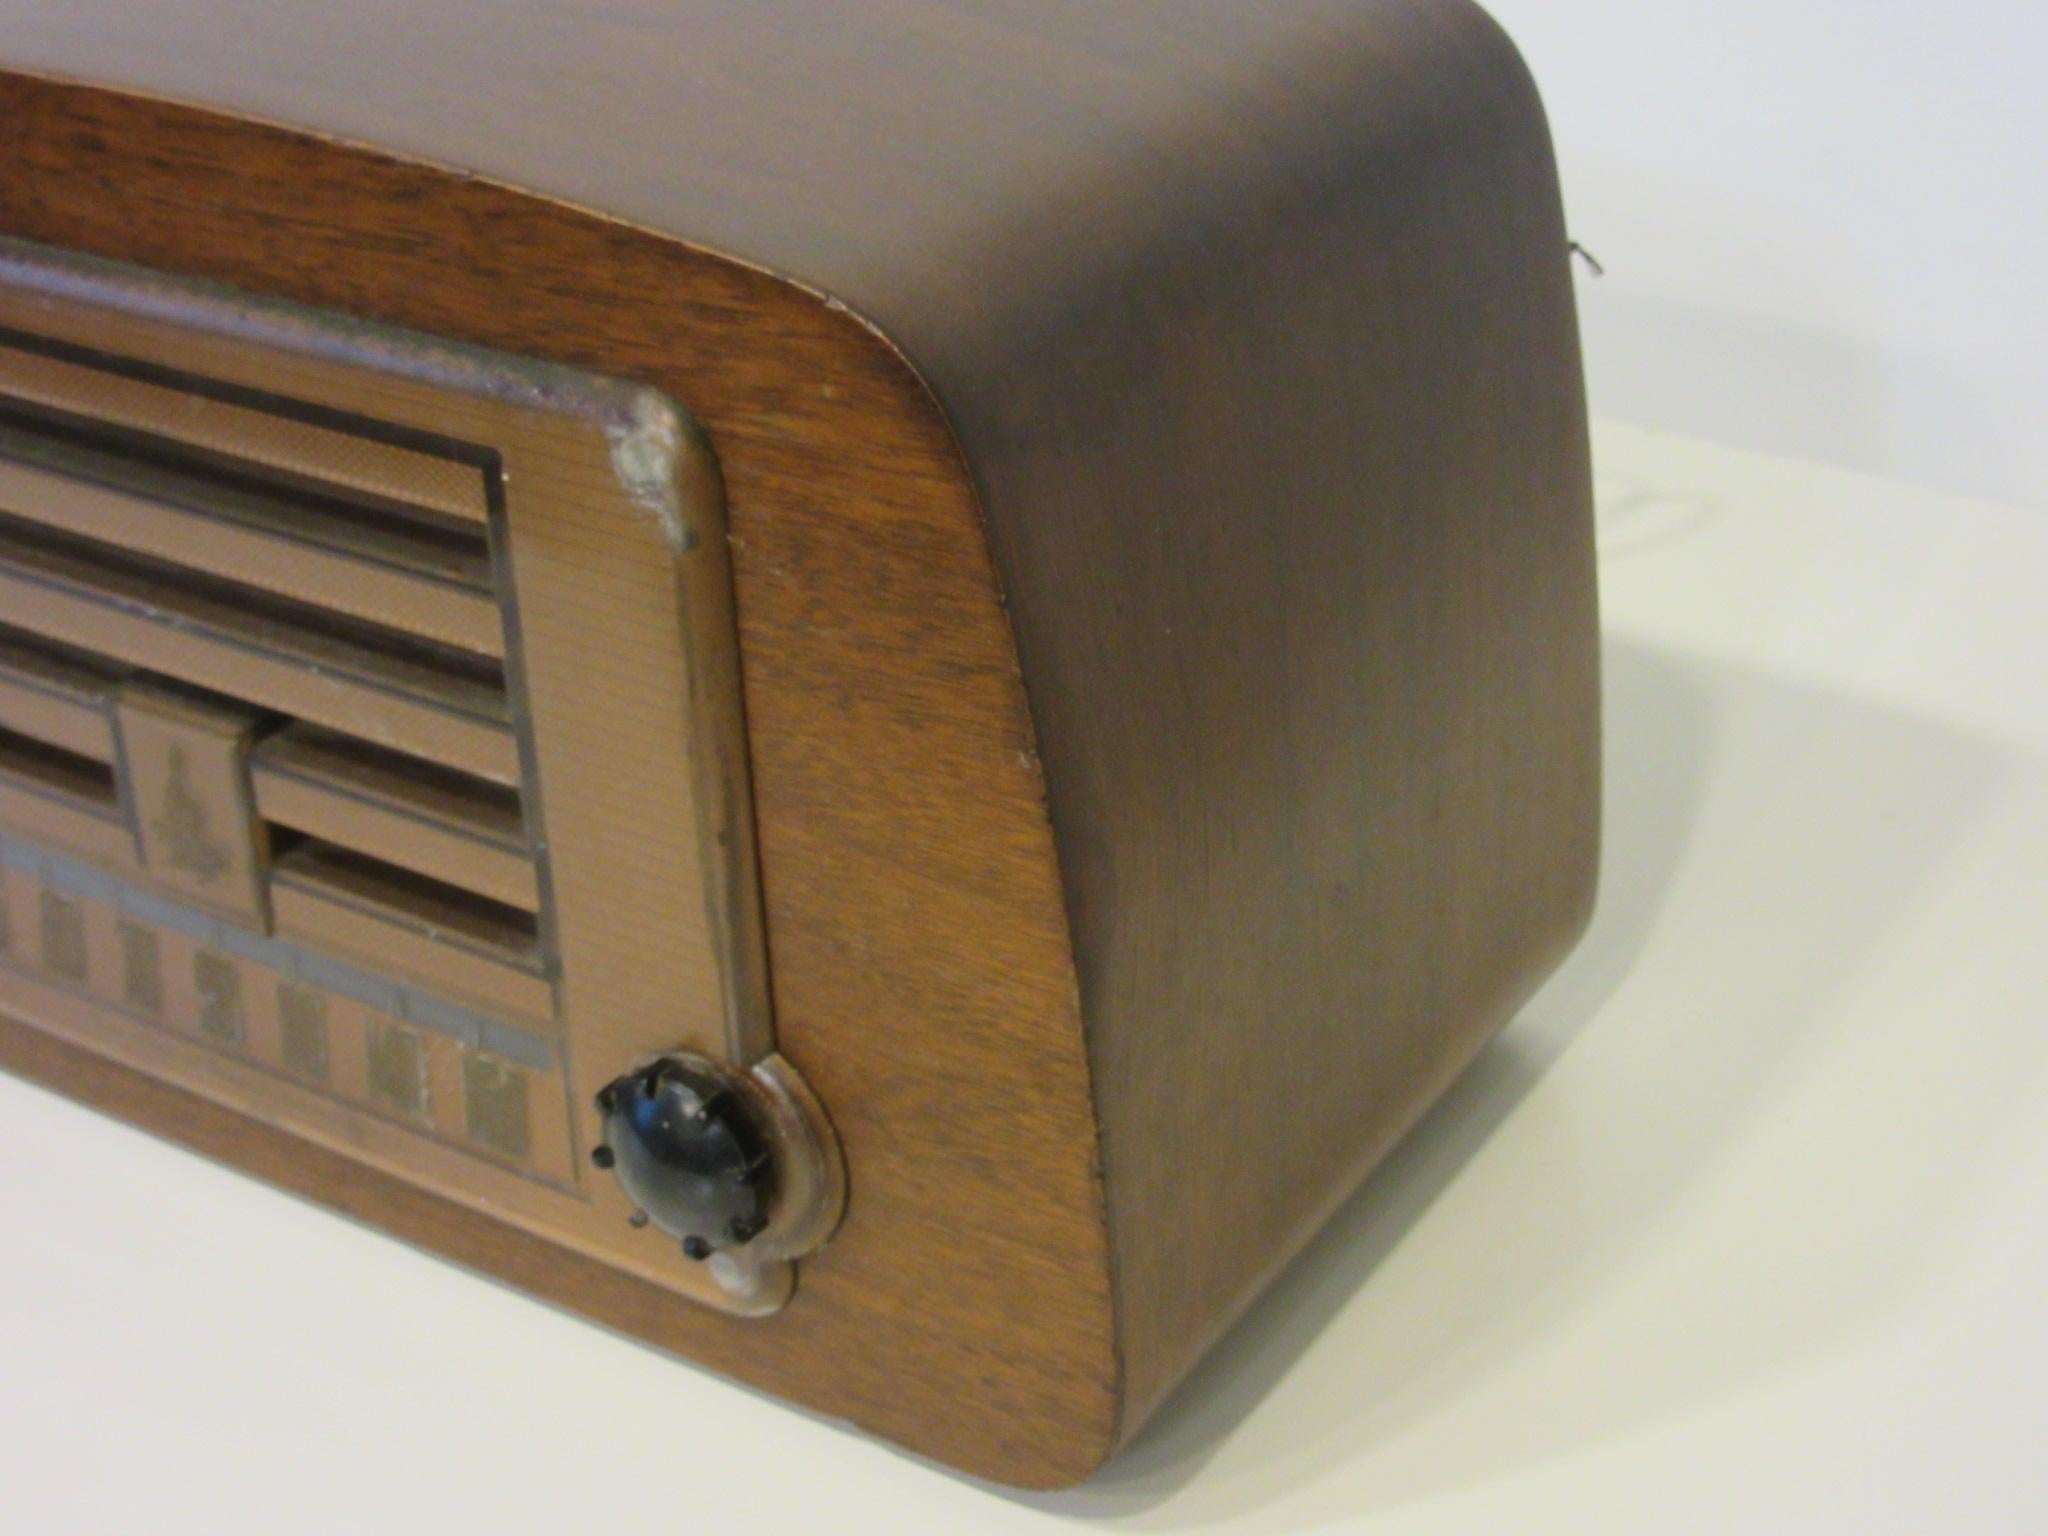 A Emerson AM radio with the case designed by Charles and Ray Eames using their bent molded plywood technique discovered during the war years and transferred over to commercial items. The cases were manufactured by the Evans Products Company and the